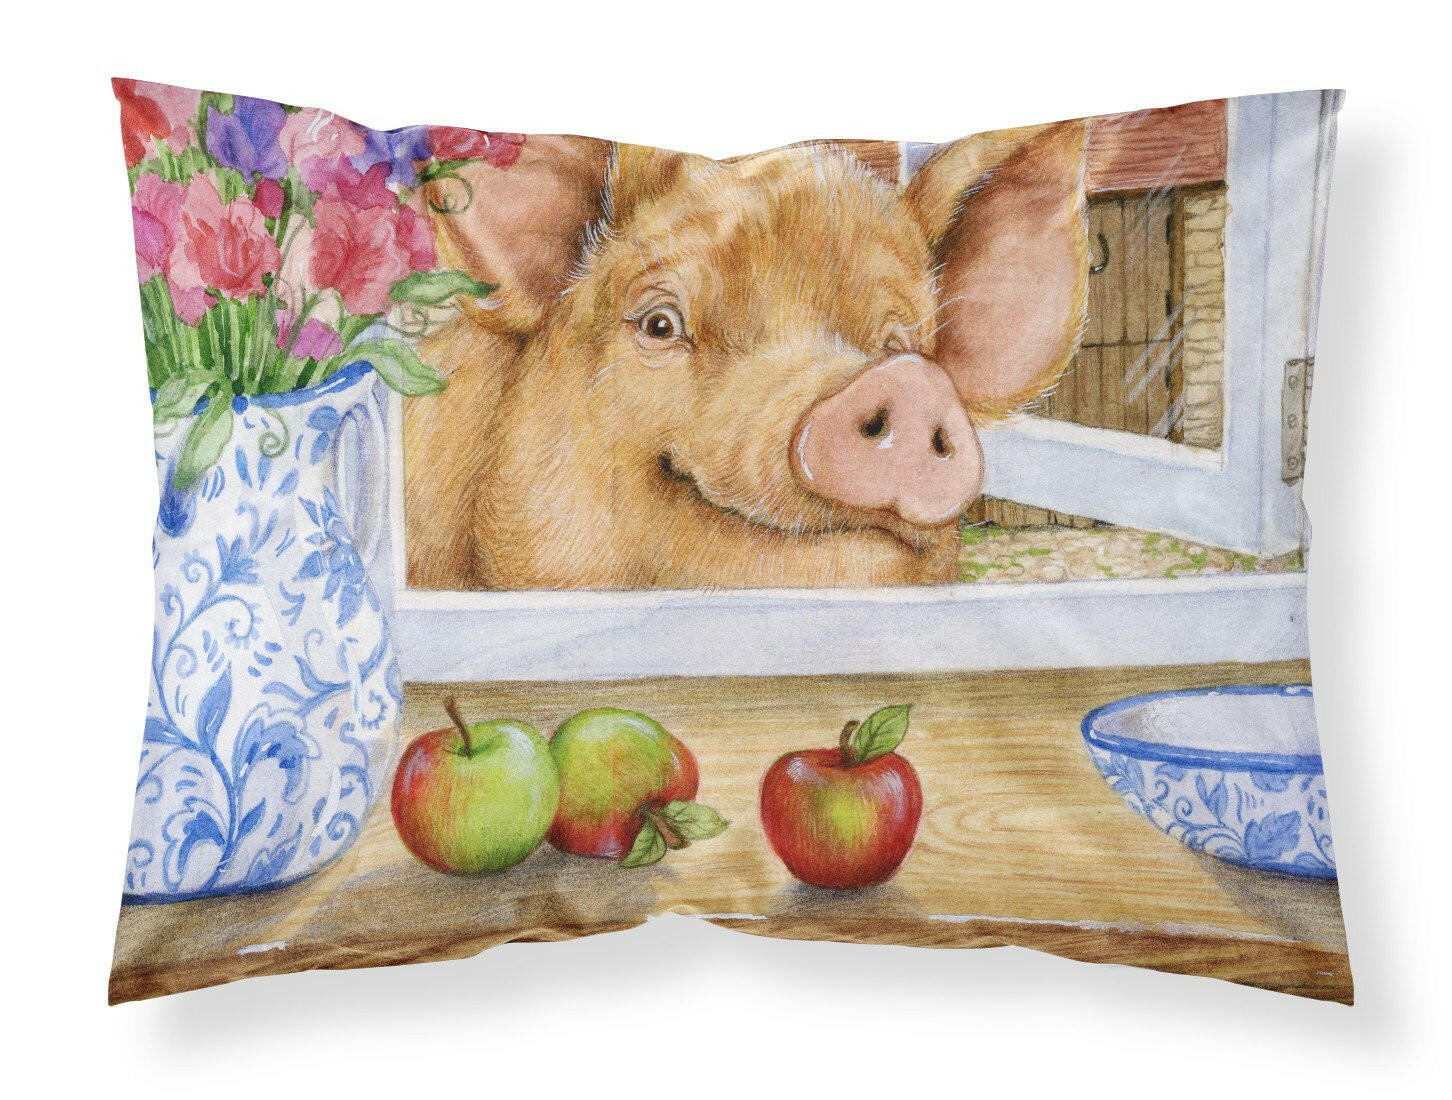 Pig trying to reach the Apple in the Window Fabric Standard Pillowcase CDCO0352PILLOWCASE by Caroline's Treasures